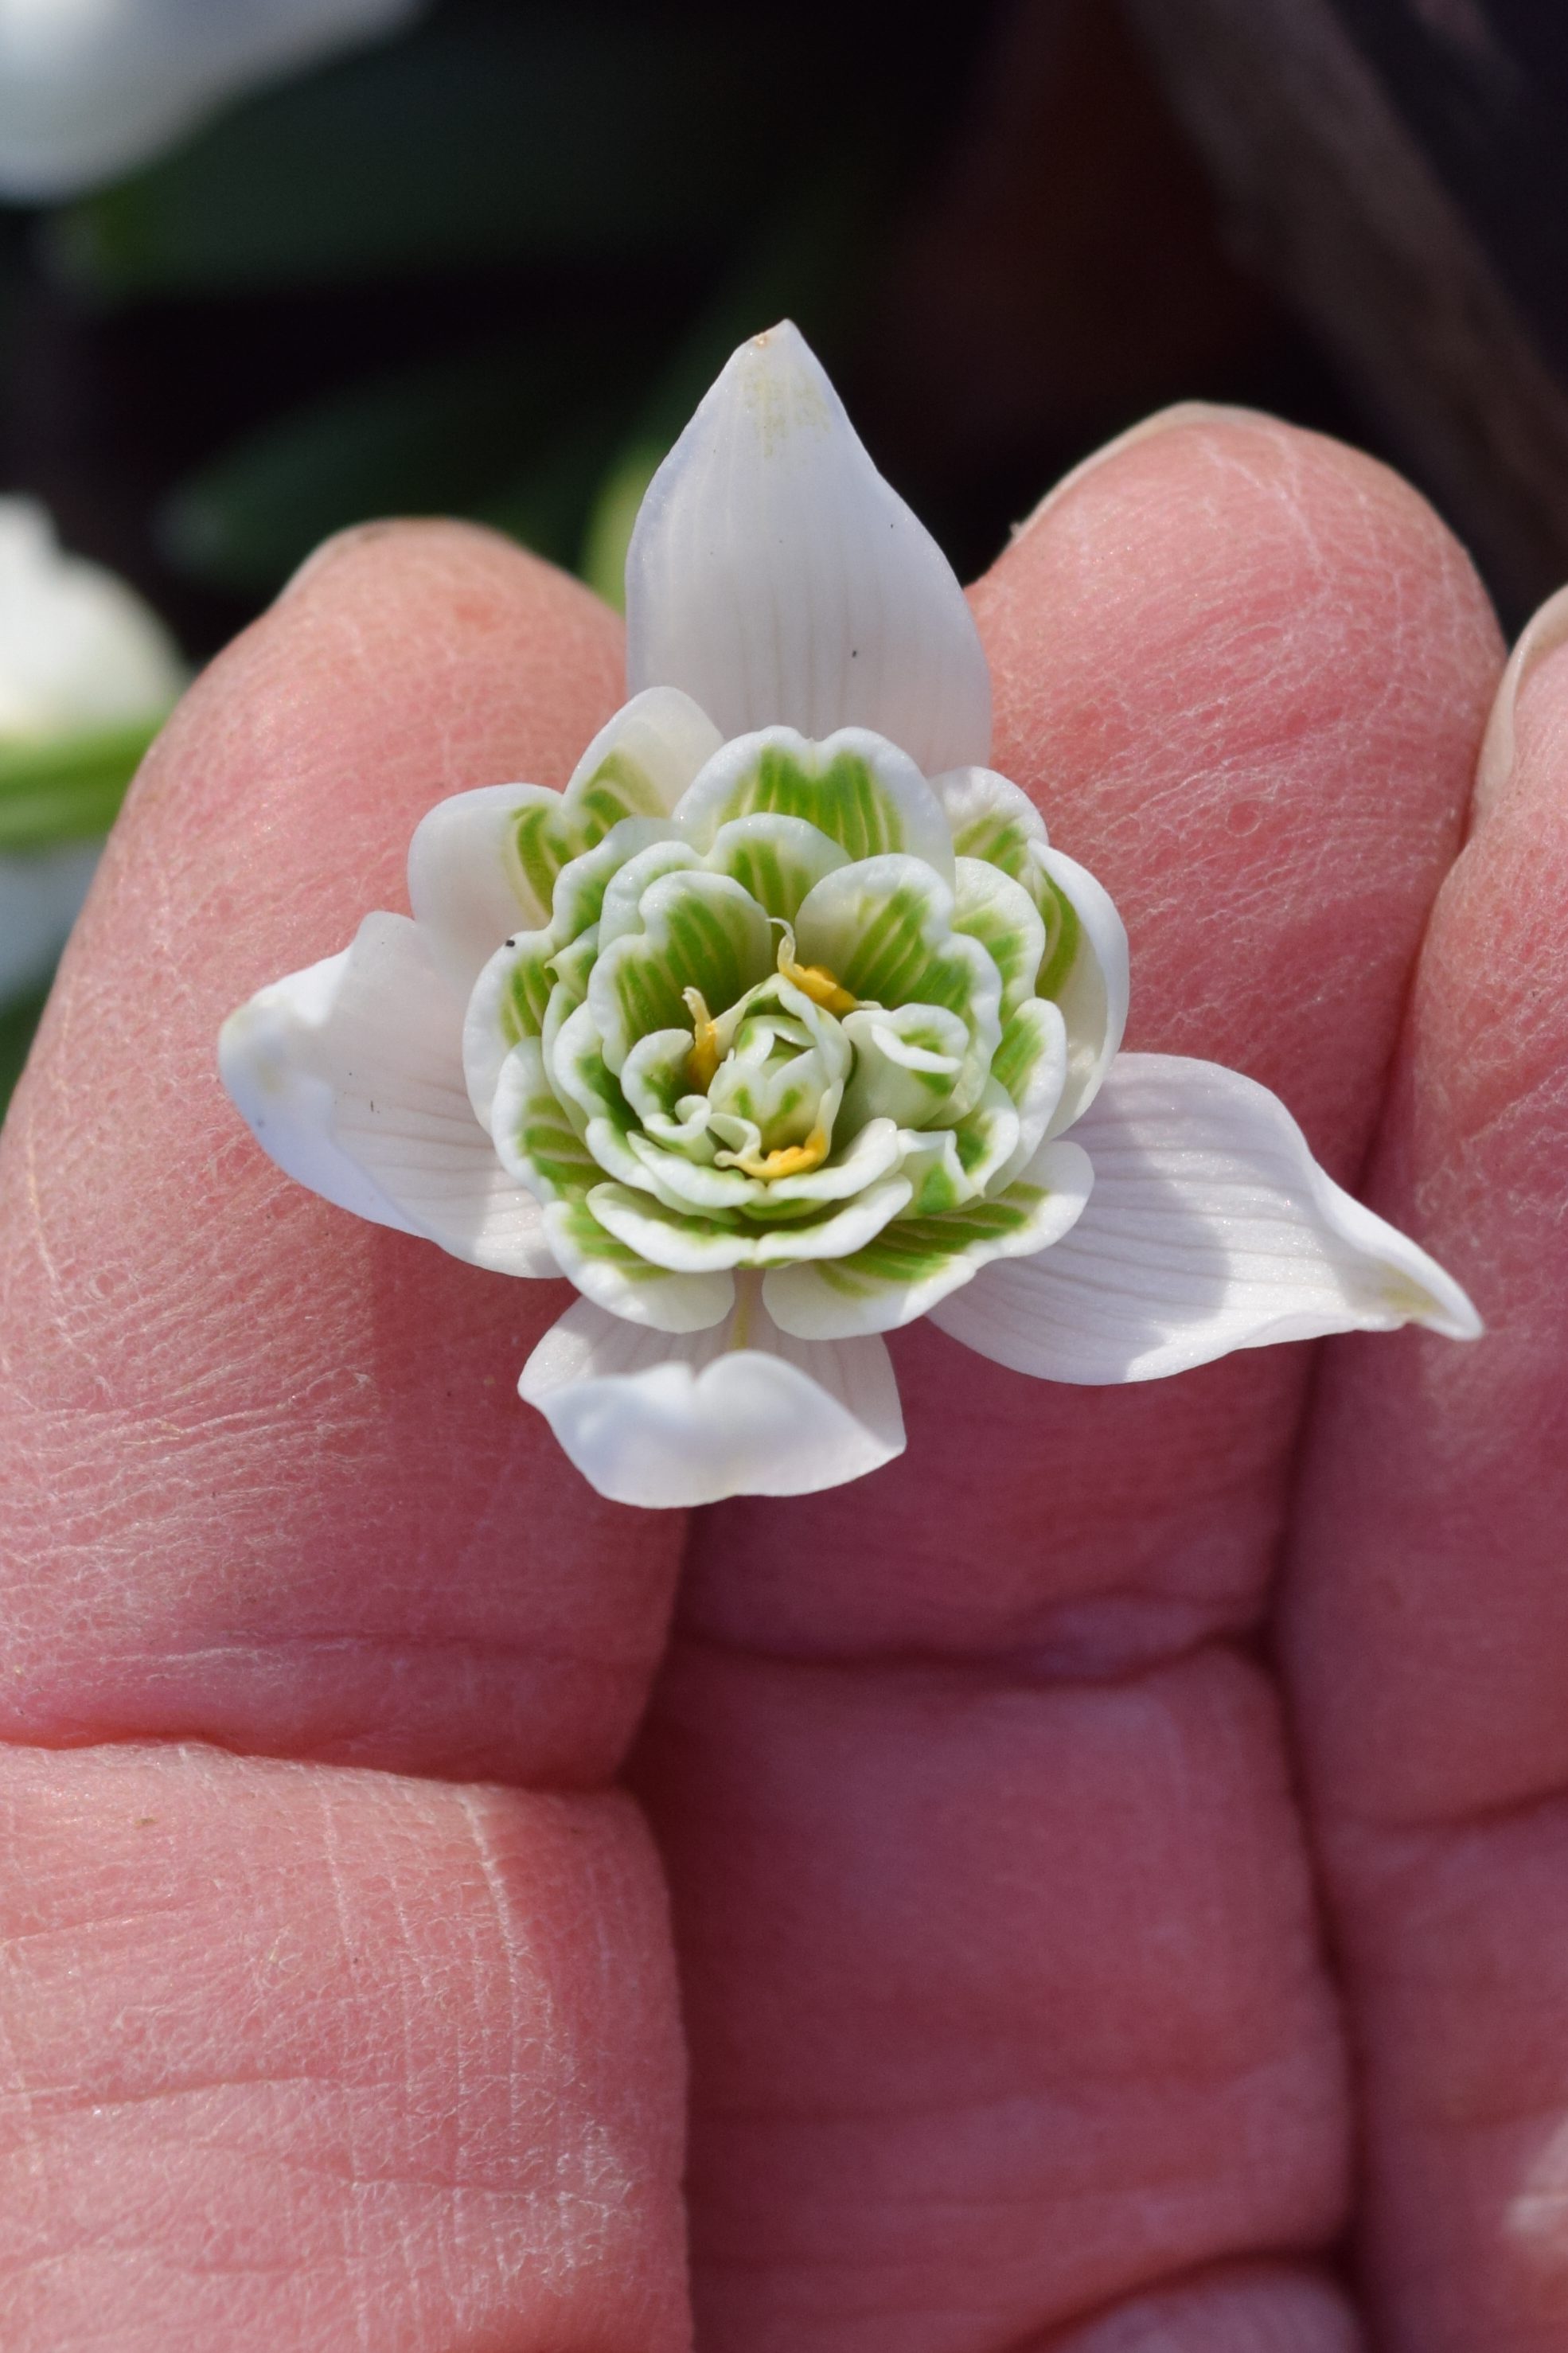 Holding a double flowered snowdrop in your hand allows you to admire all of the details